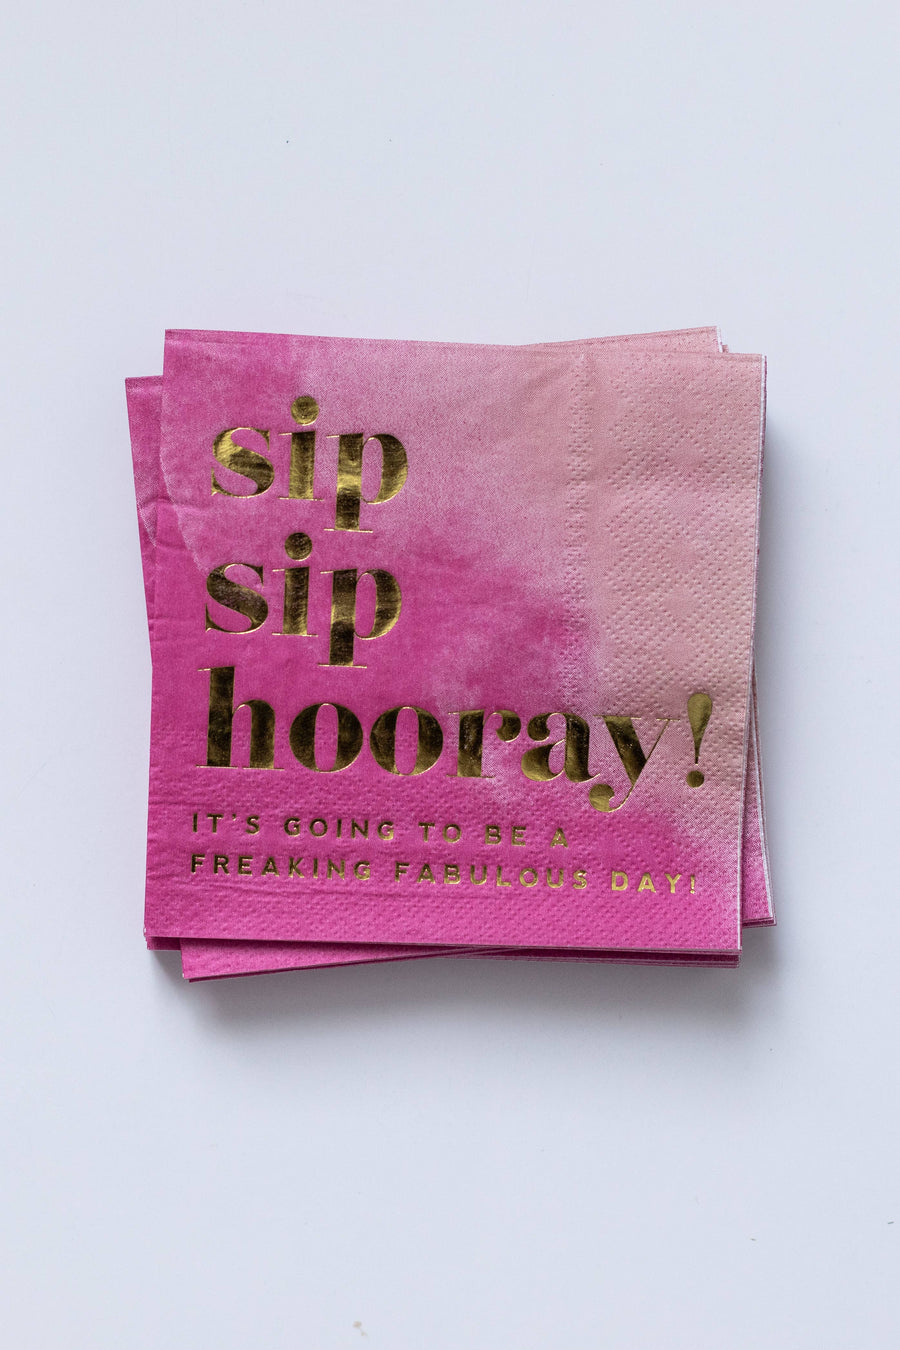 Kitty Meow Boutique - Sip Sip Hooray Cocktail Party Napkin - Bright Pink Napkin